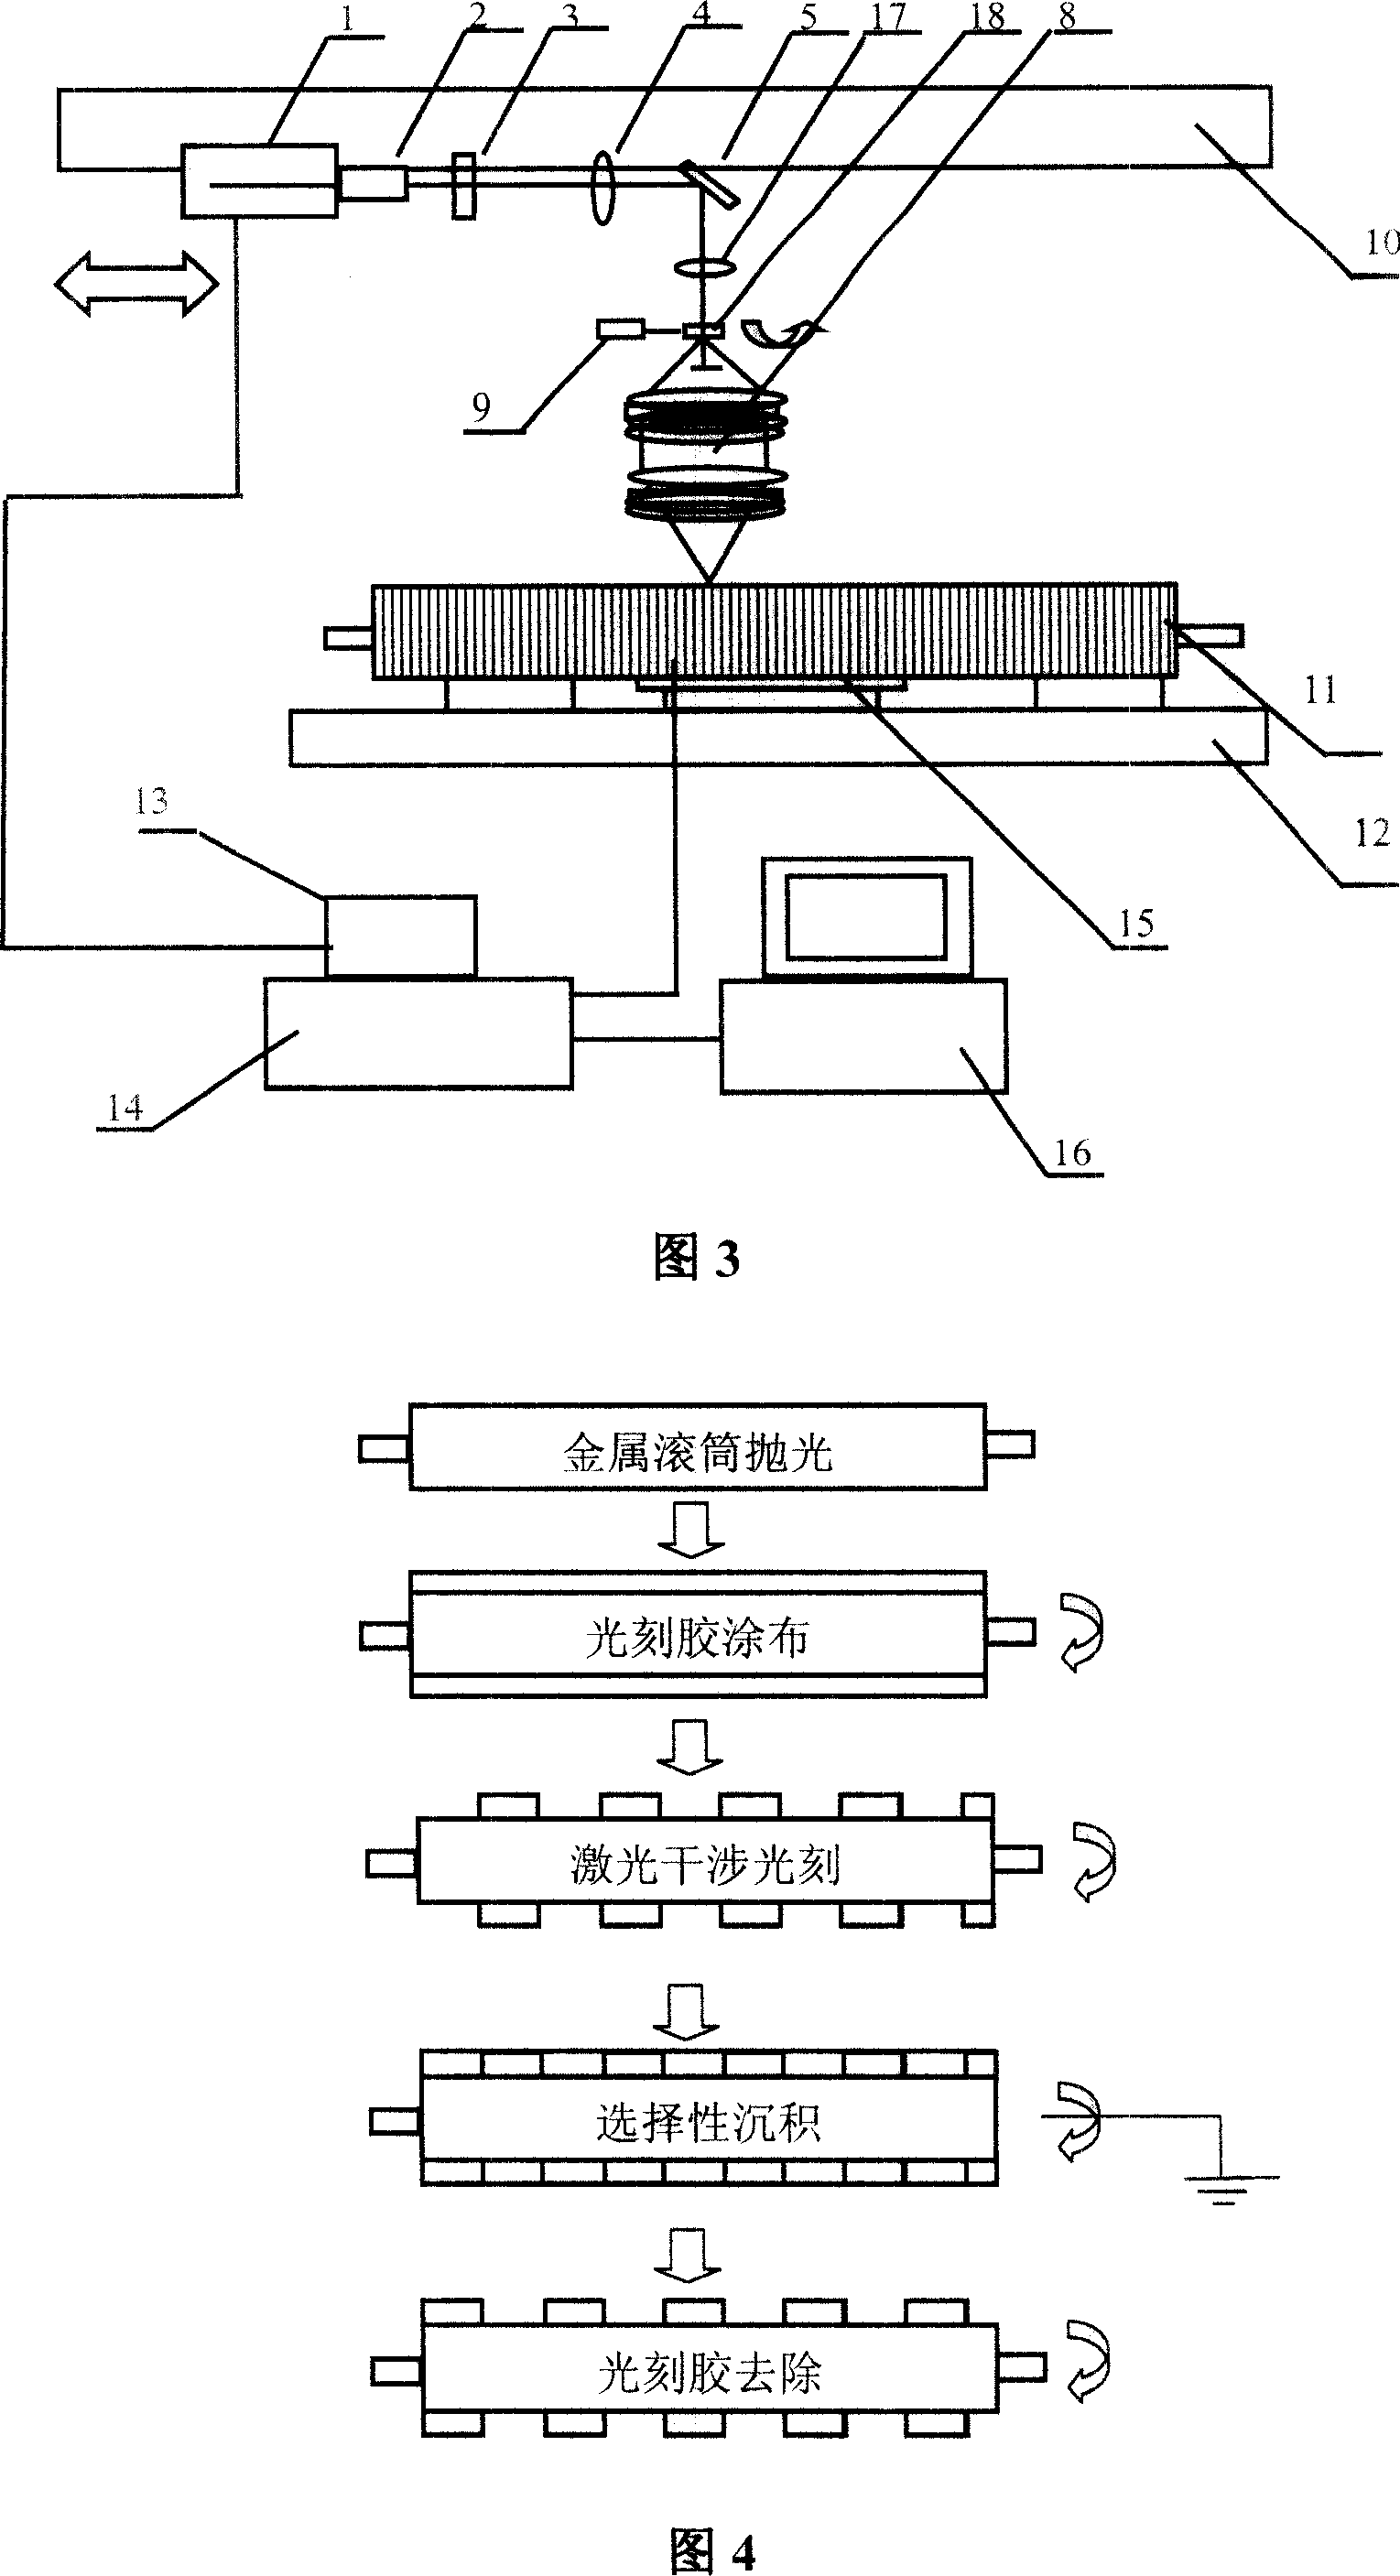 Method of preparing metal roller with surface relief microstructure